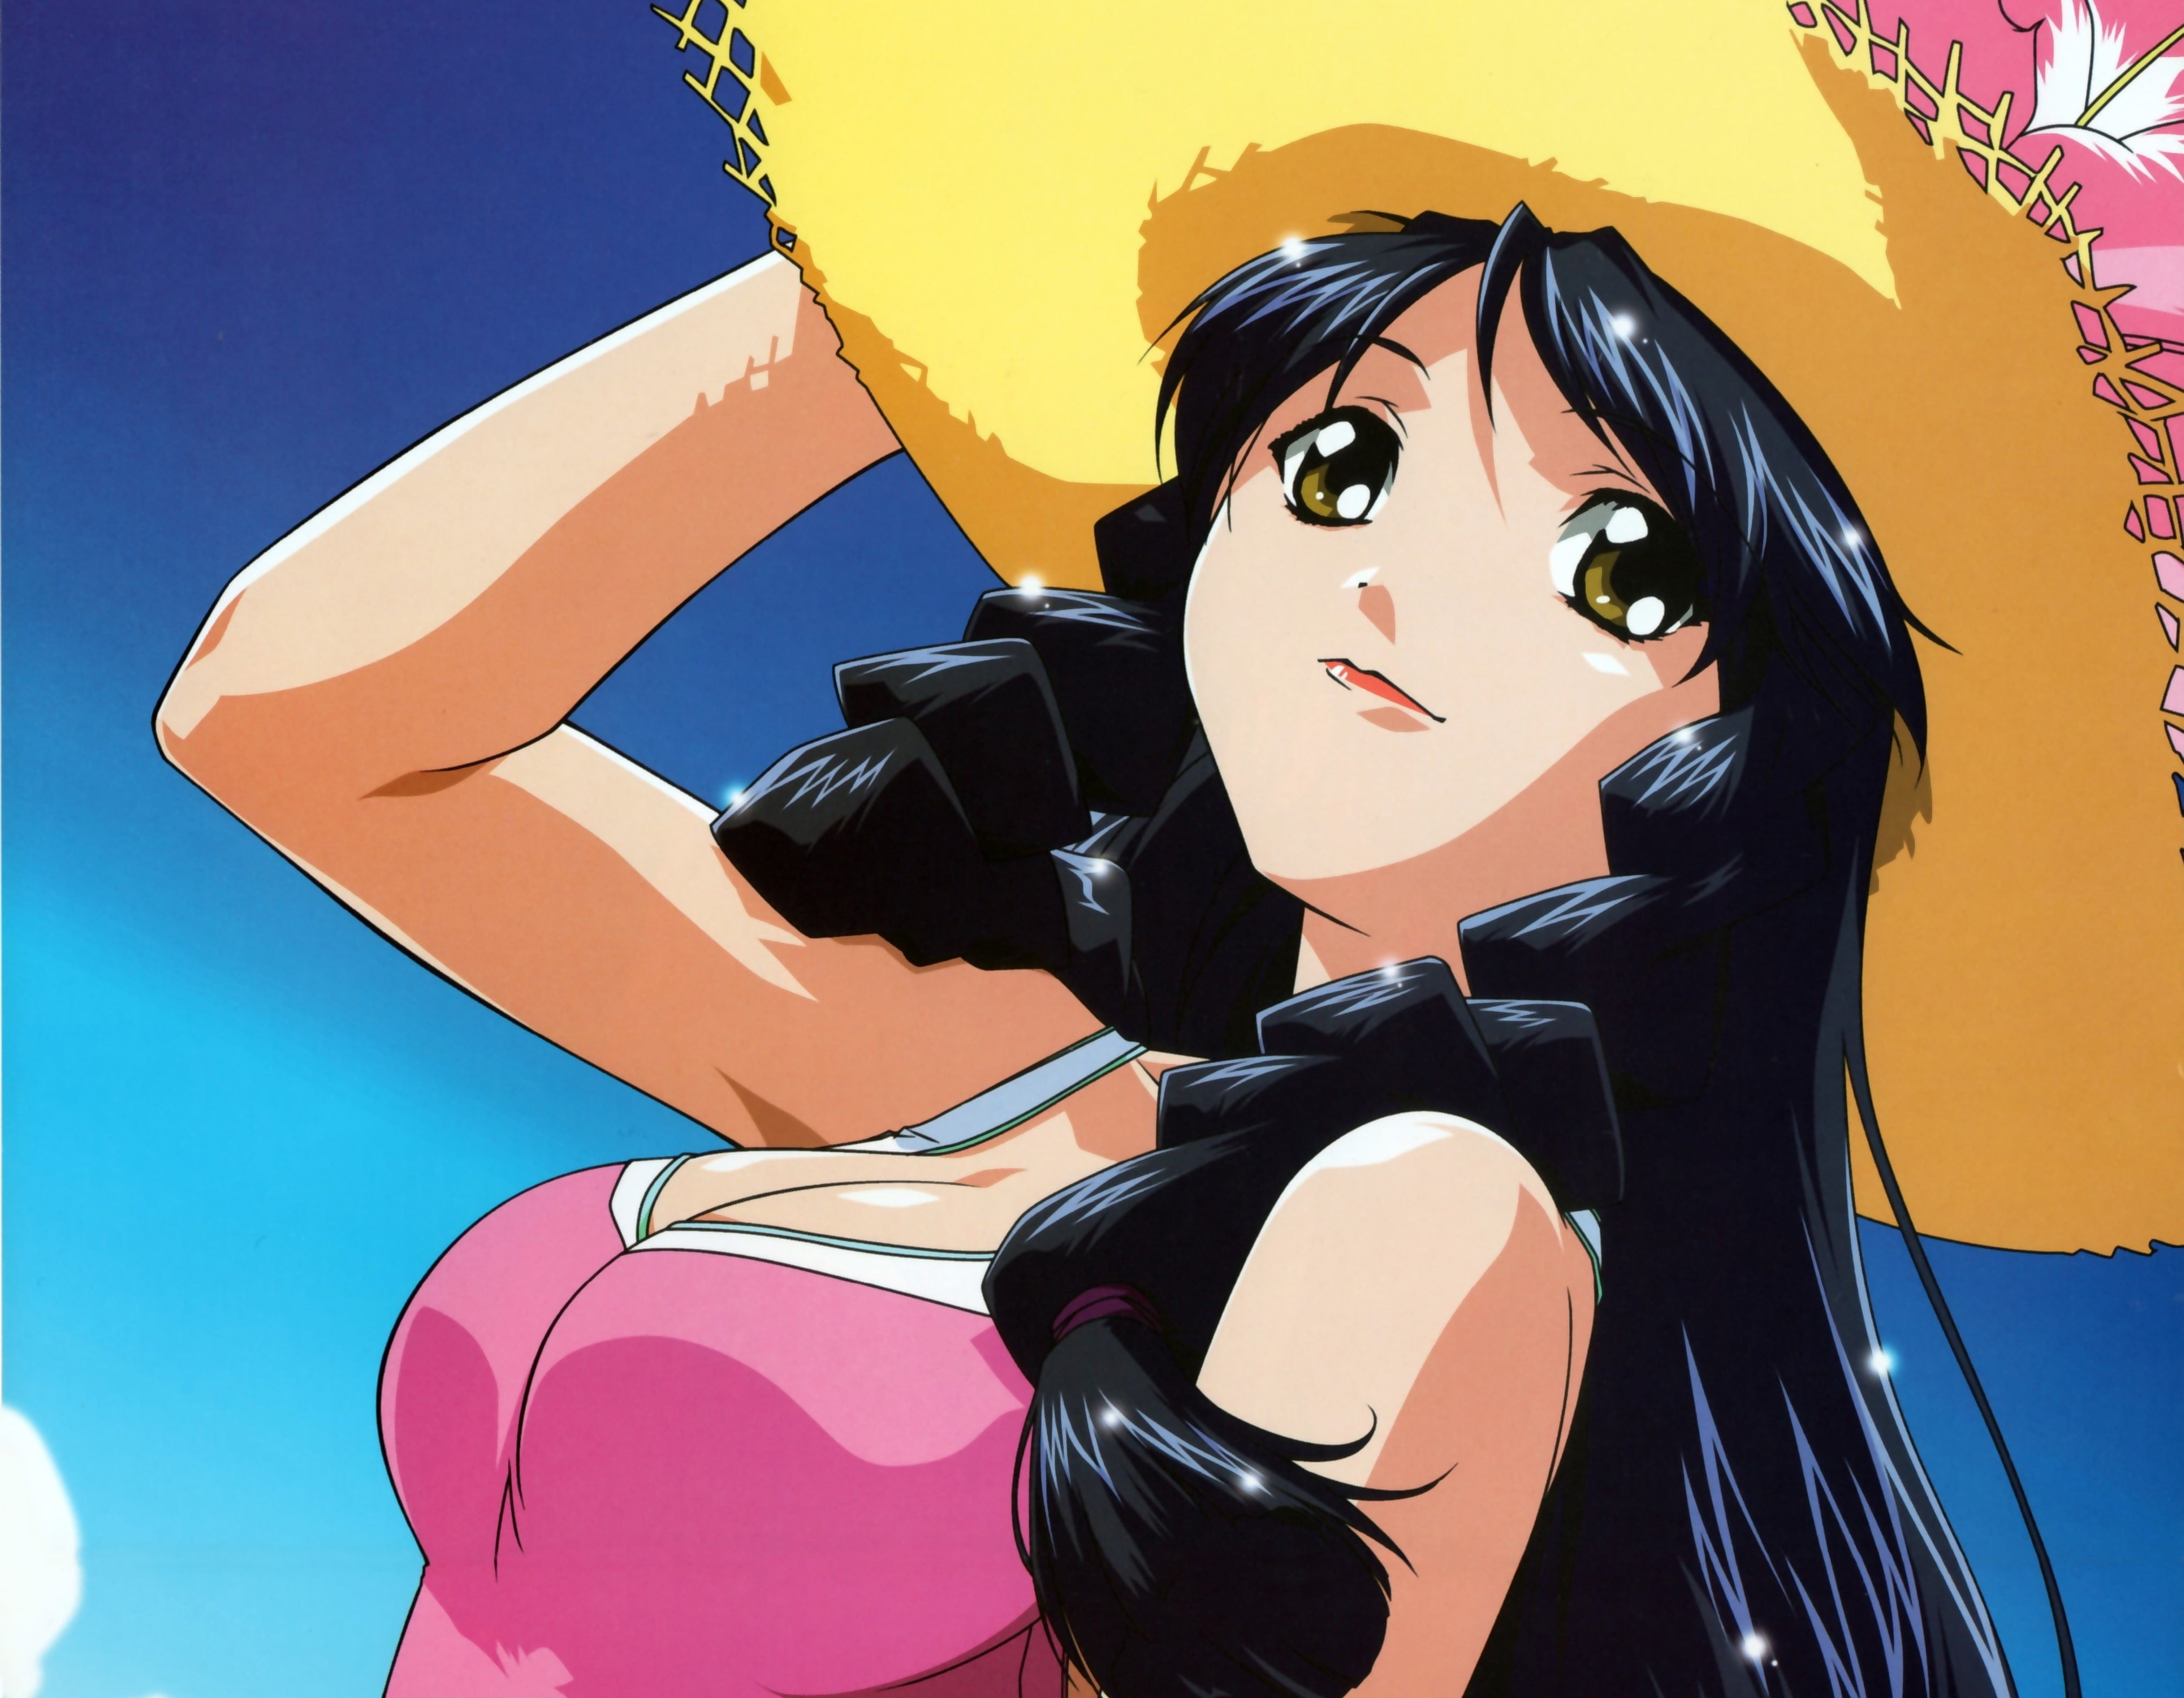 female anime character with black hair and yellow hat